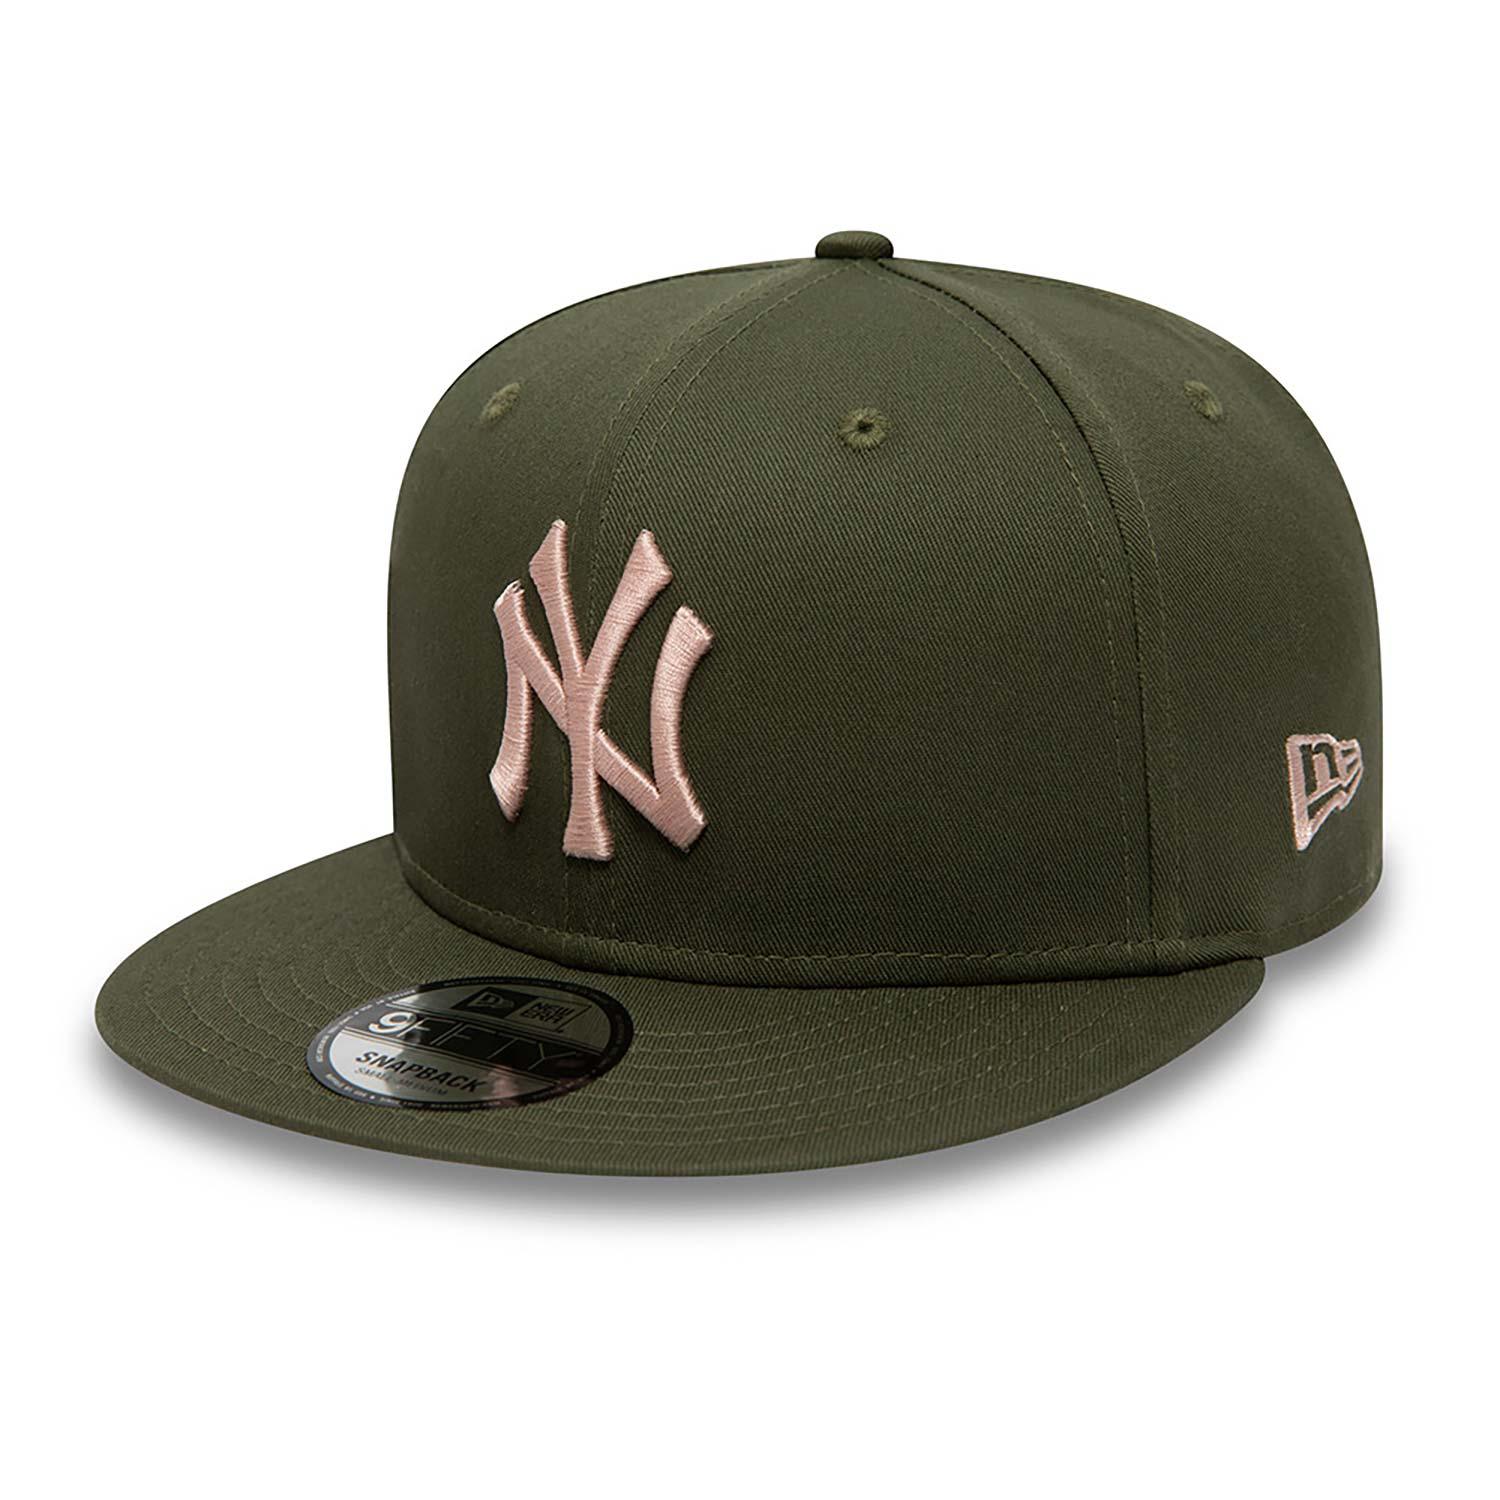 NEW ERA 9FIFTY SIDE PATCH NEW YORK YANKEES GREEN SNAPBACK - FAM